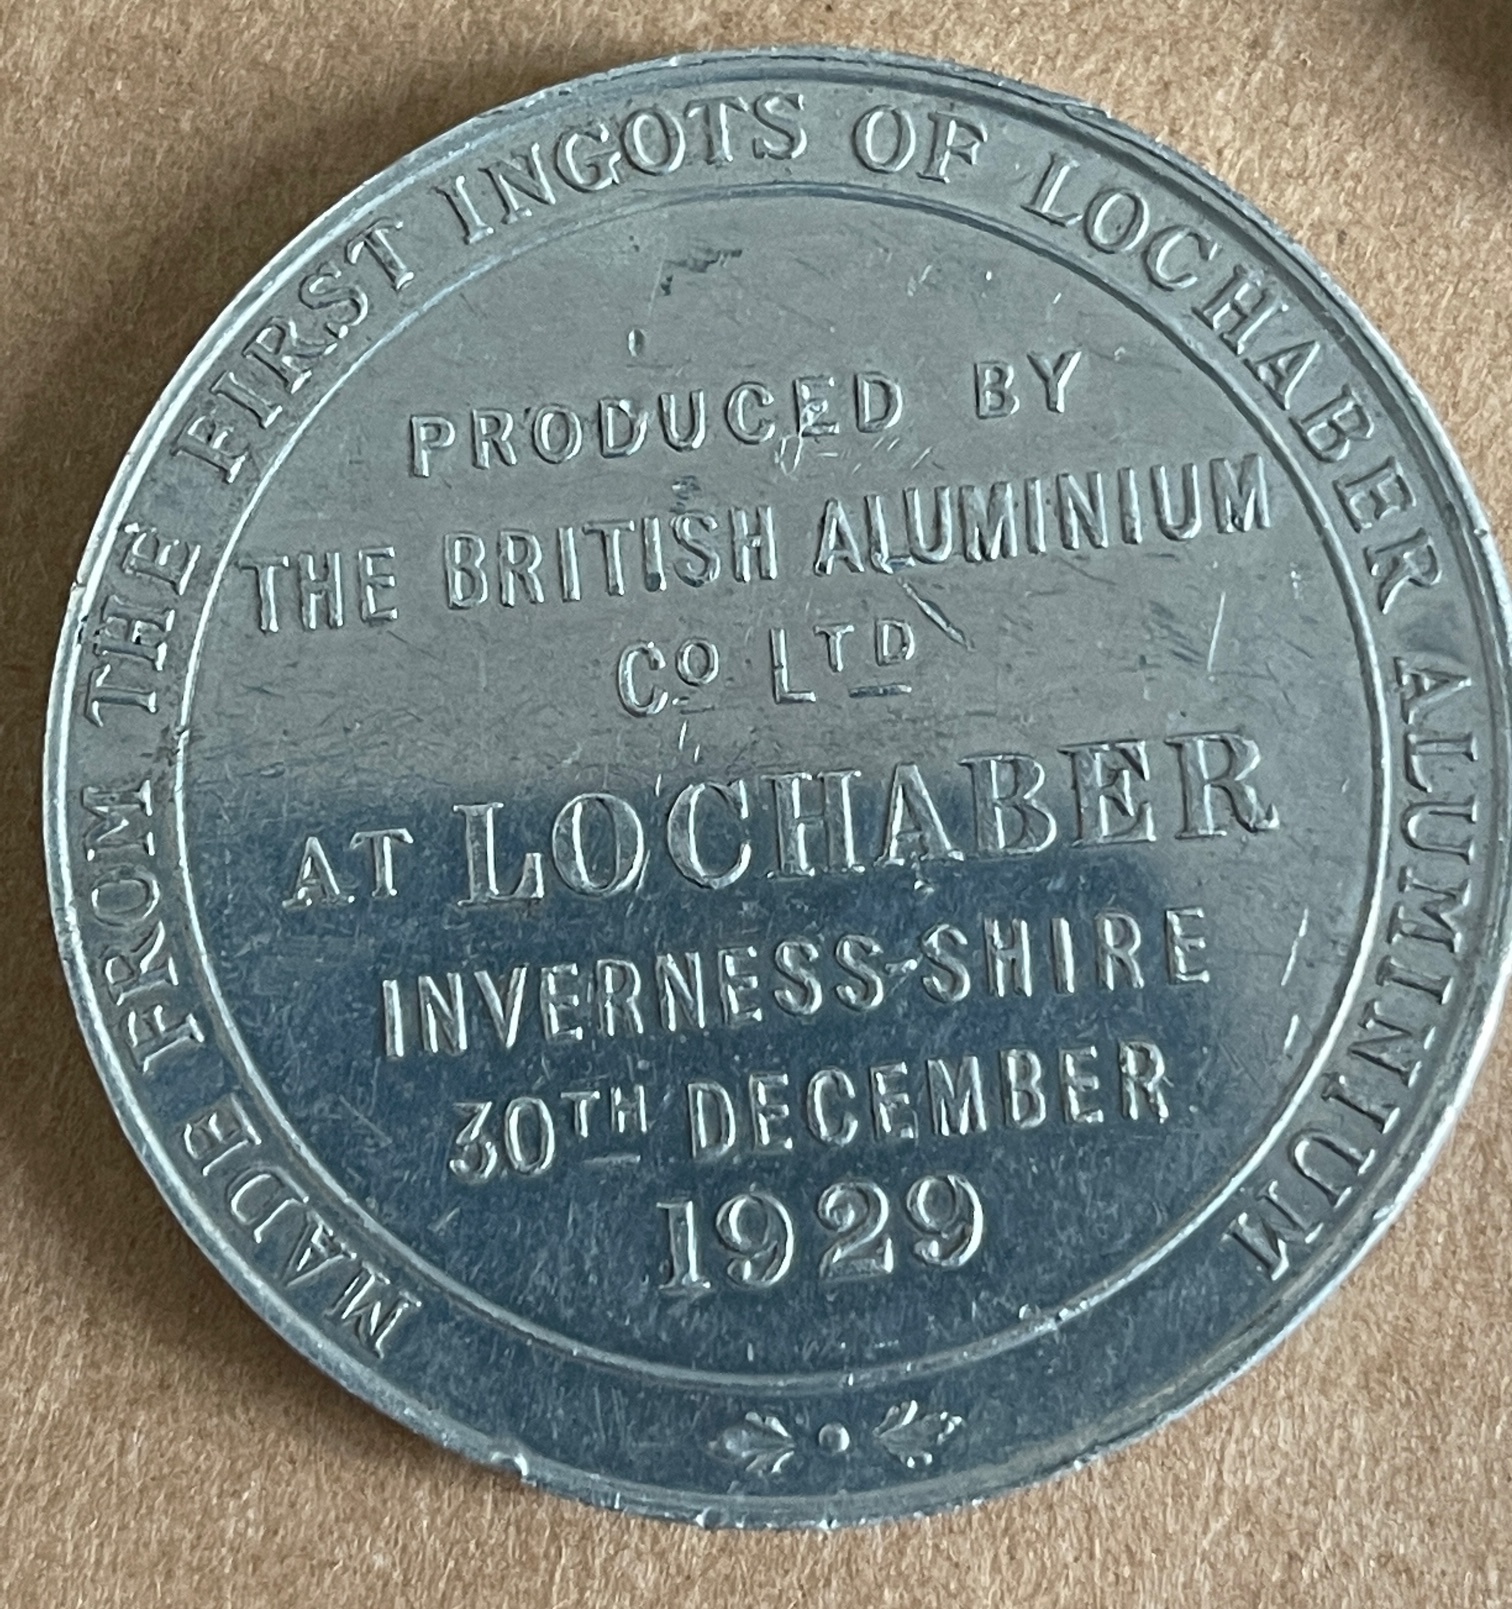 Lot of Various Antique/Vintage White Metal Medals including Lochaber Aliminium 1929 example. - Image 7 of 8